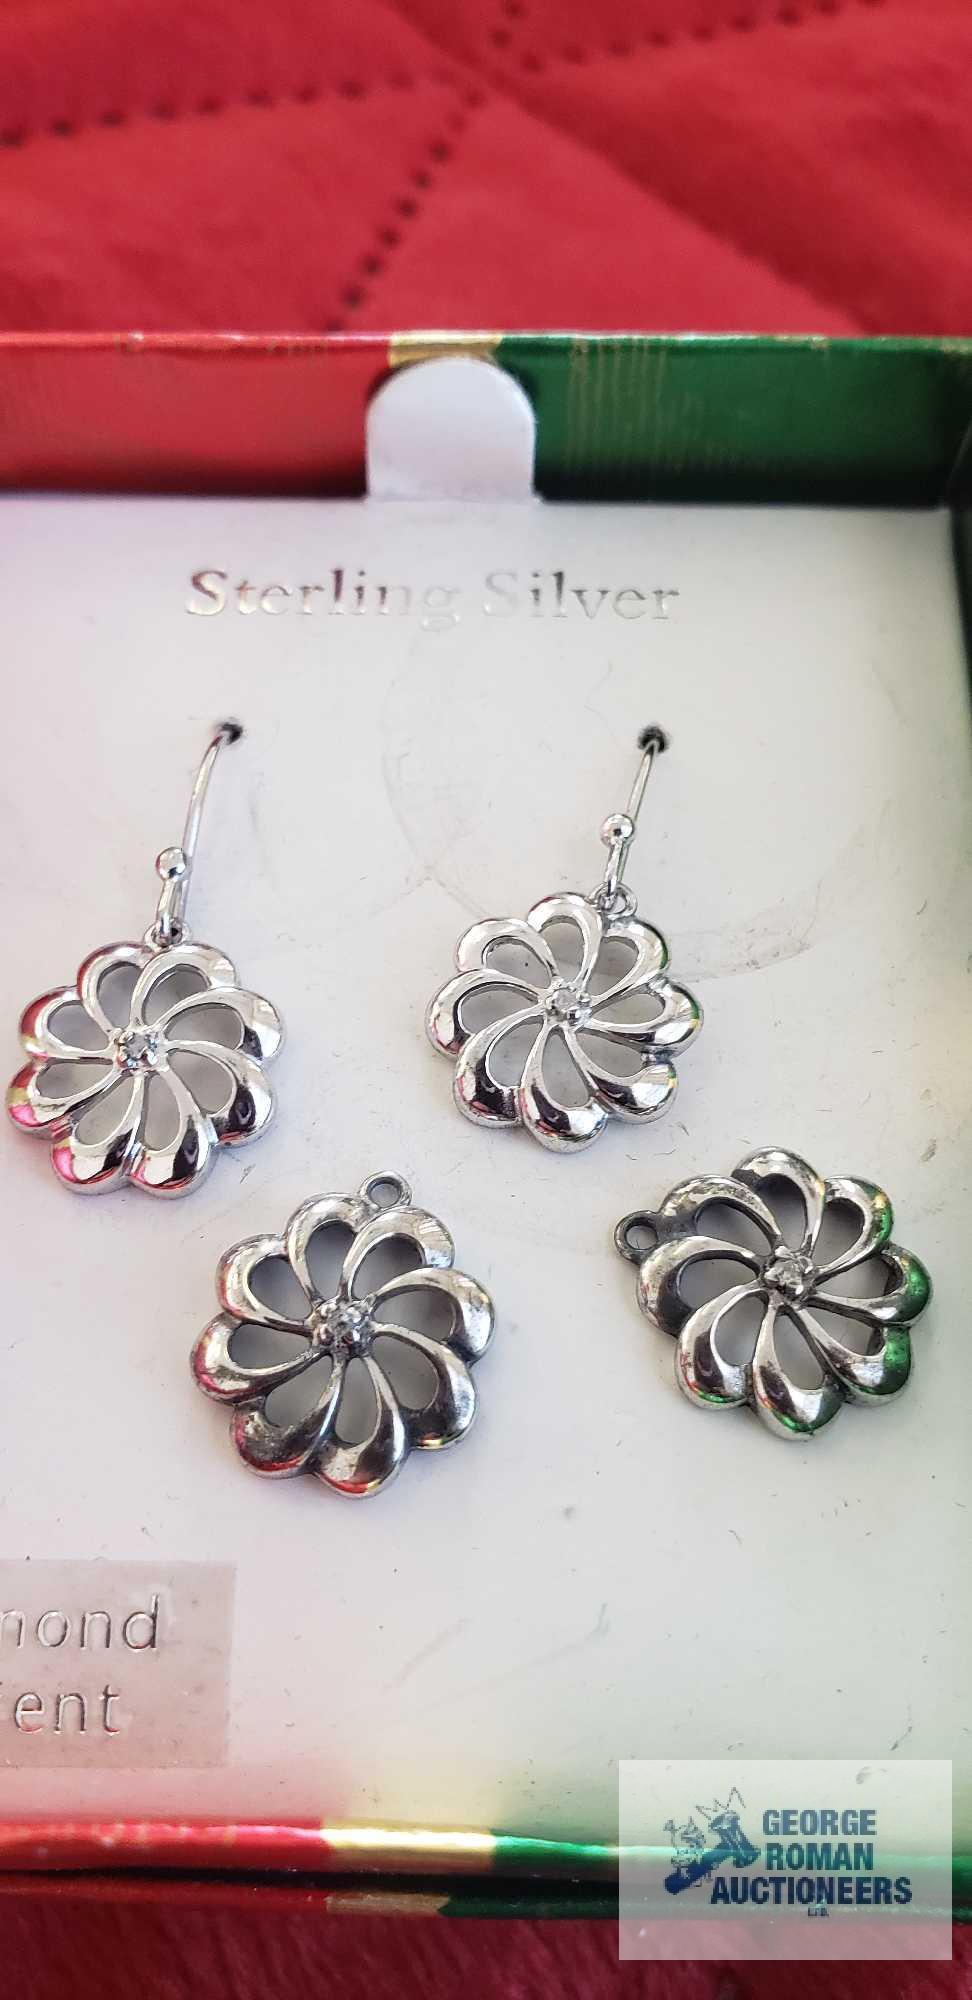 Silver colored dangle earrings, marked 925, with clear gemstone chip and two extra dangles. Box